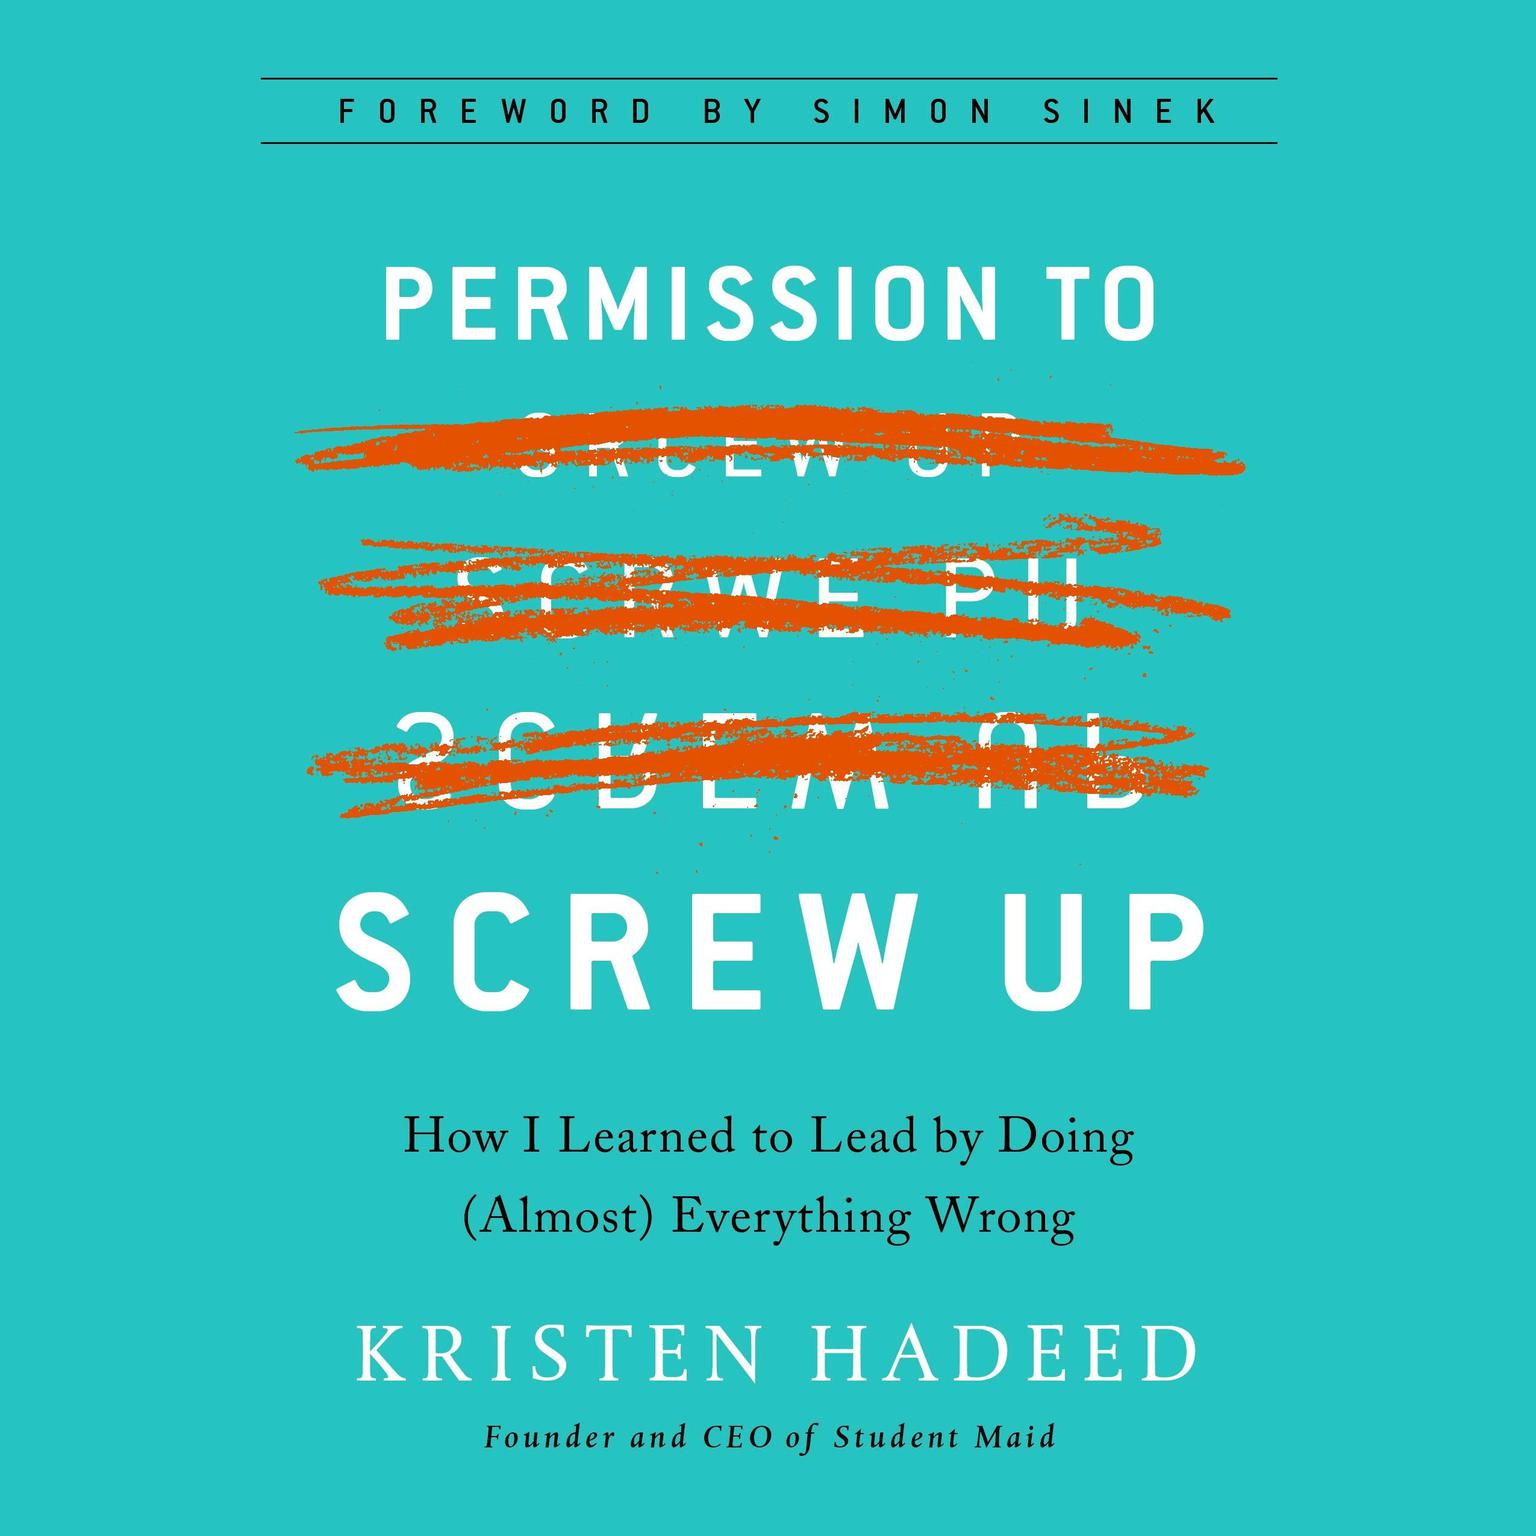 Permission to Screw Up: How I Learned to Lead by Doing (Almost) Everything Wrong Audiobook, by Kristen Hadeed